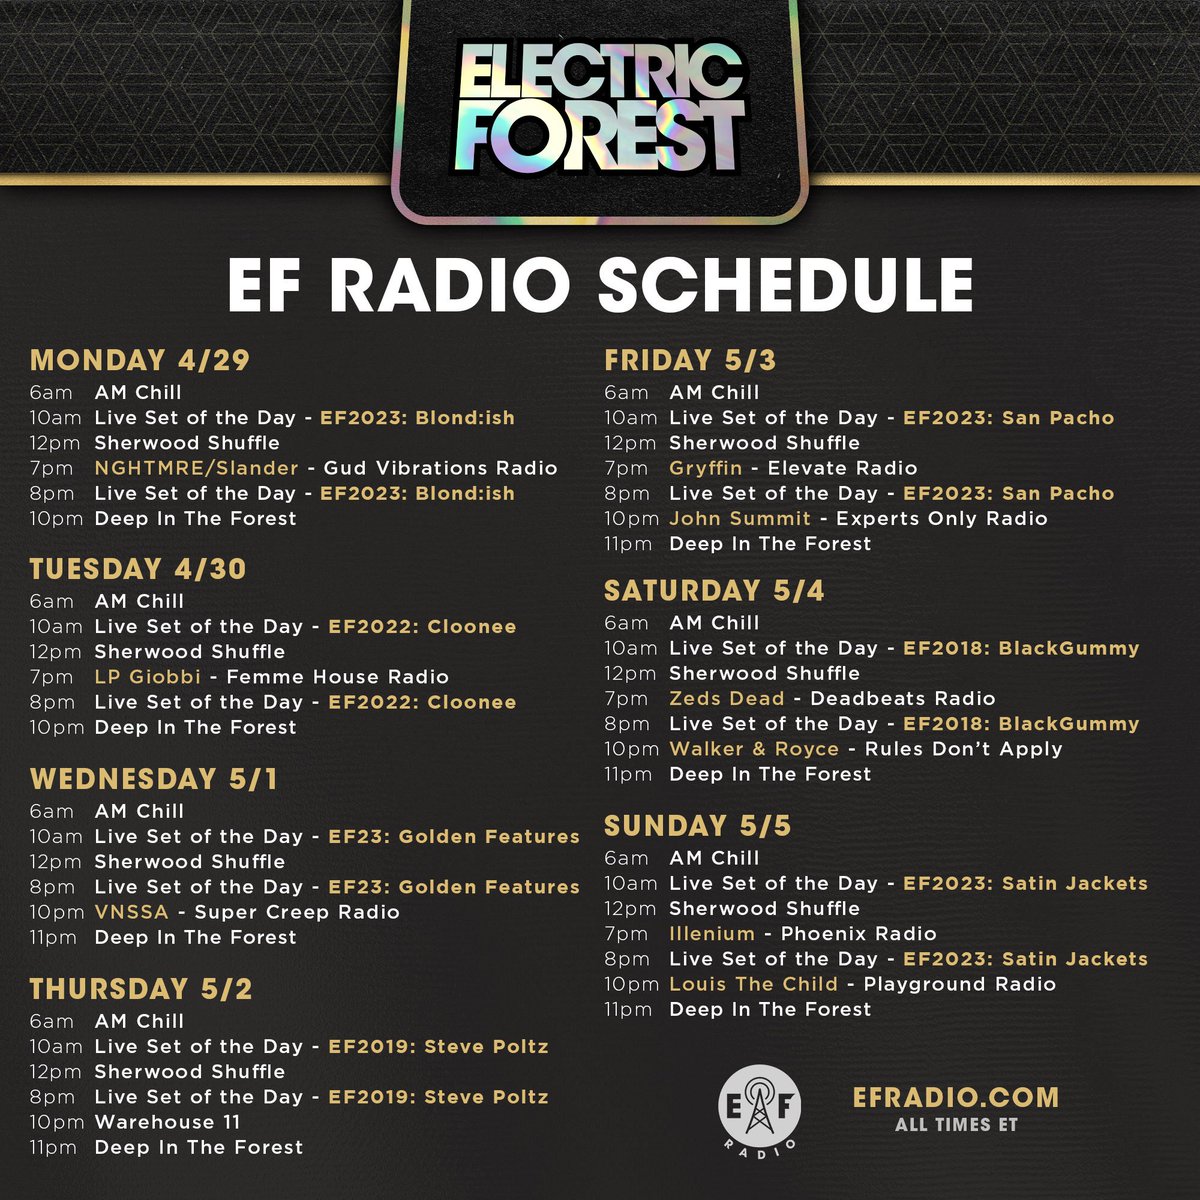 This week on @EForestRadio! 📻🌲 Tune in for #EF2023 performances from @blond_ish, @GoldenFeatures and others, as well as daily broadcasts of the AM Chill and Sherwood Shuffle, and so much more. Hear it 24/7/365 at EFRadio.com, in the Mobile App, or on Discord!